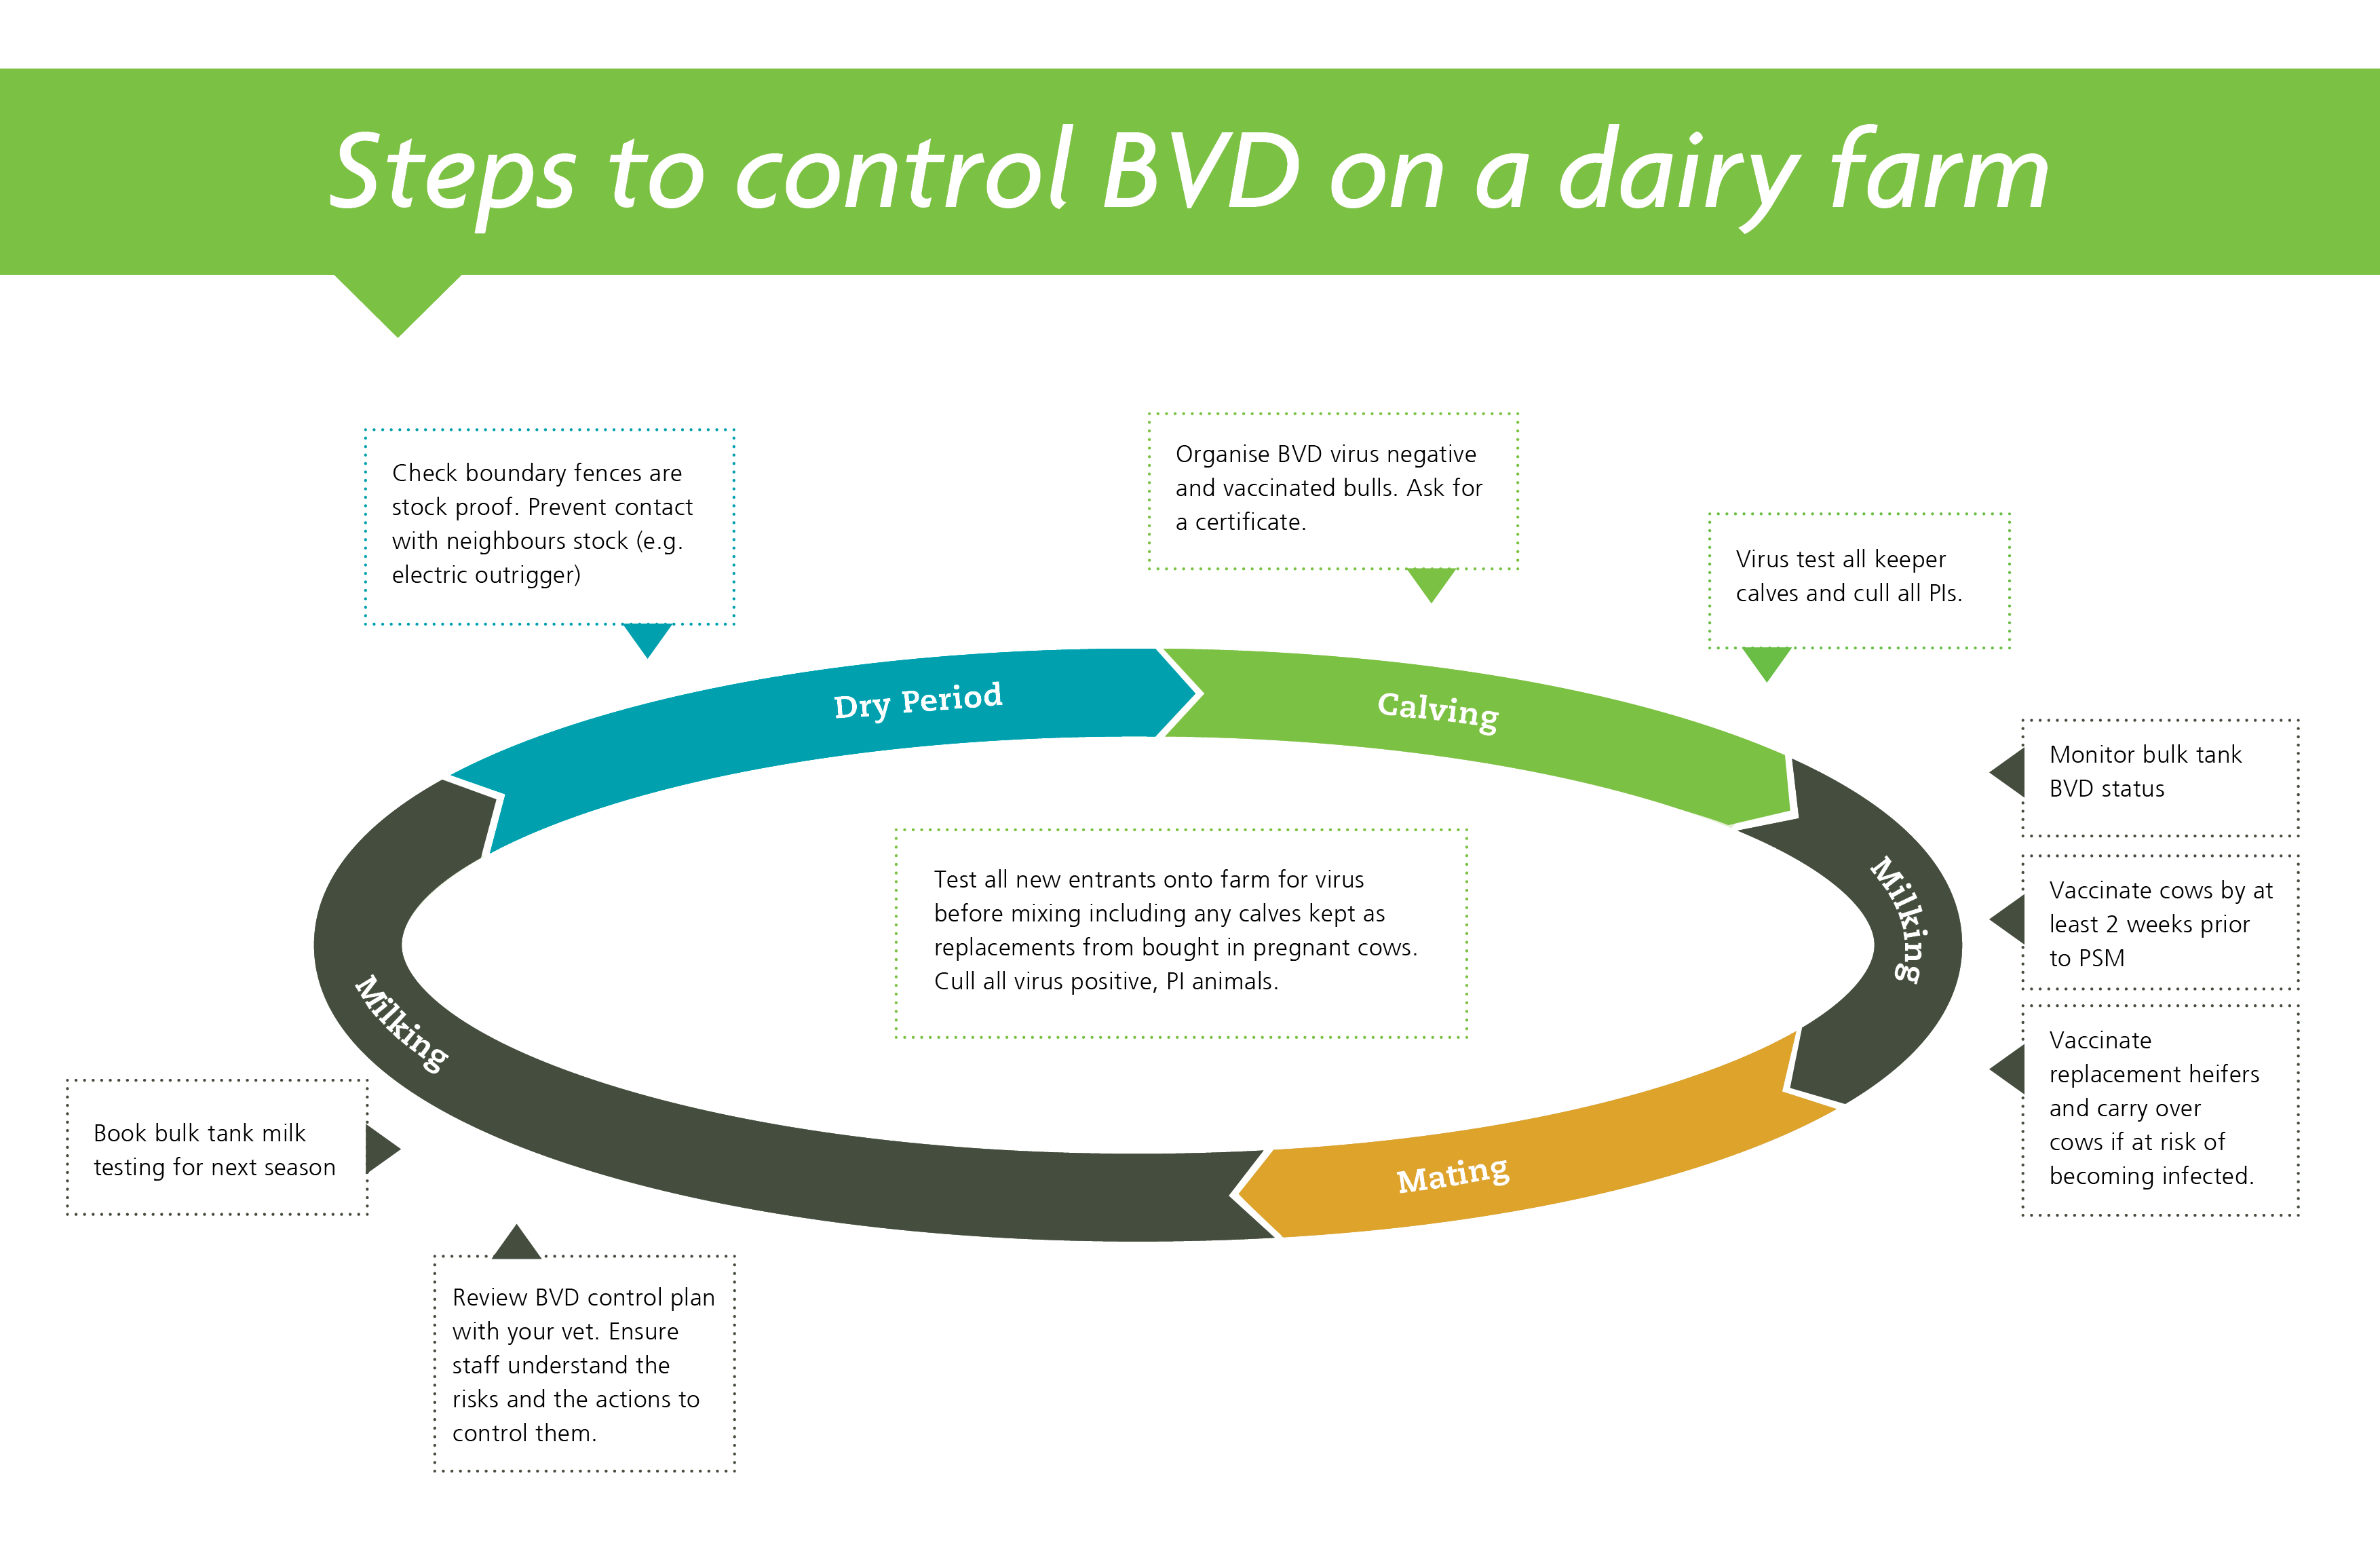 Steps to control BVD on a dairy farm